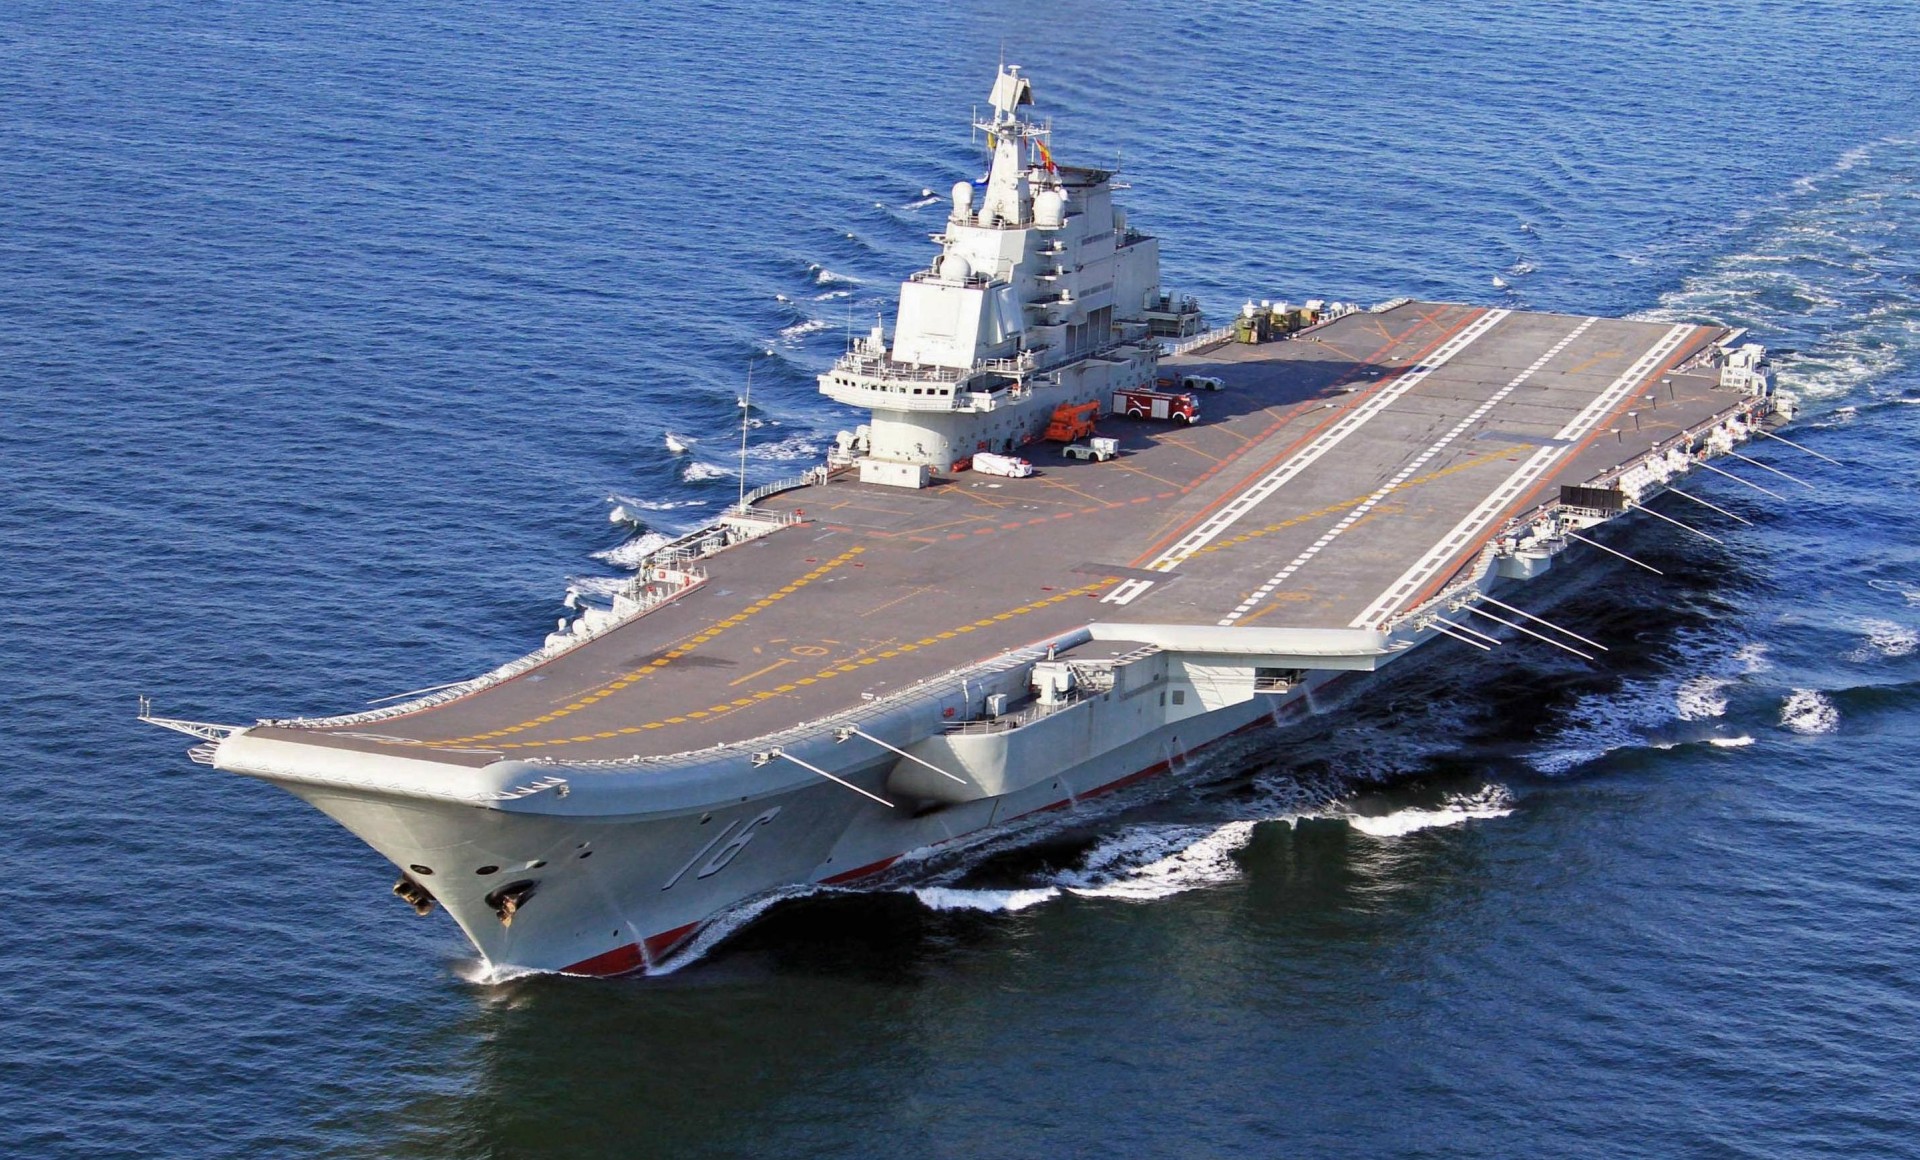 China's Second Aircraft Carrier to Have 'Military Focus'DefenceTalk ...